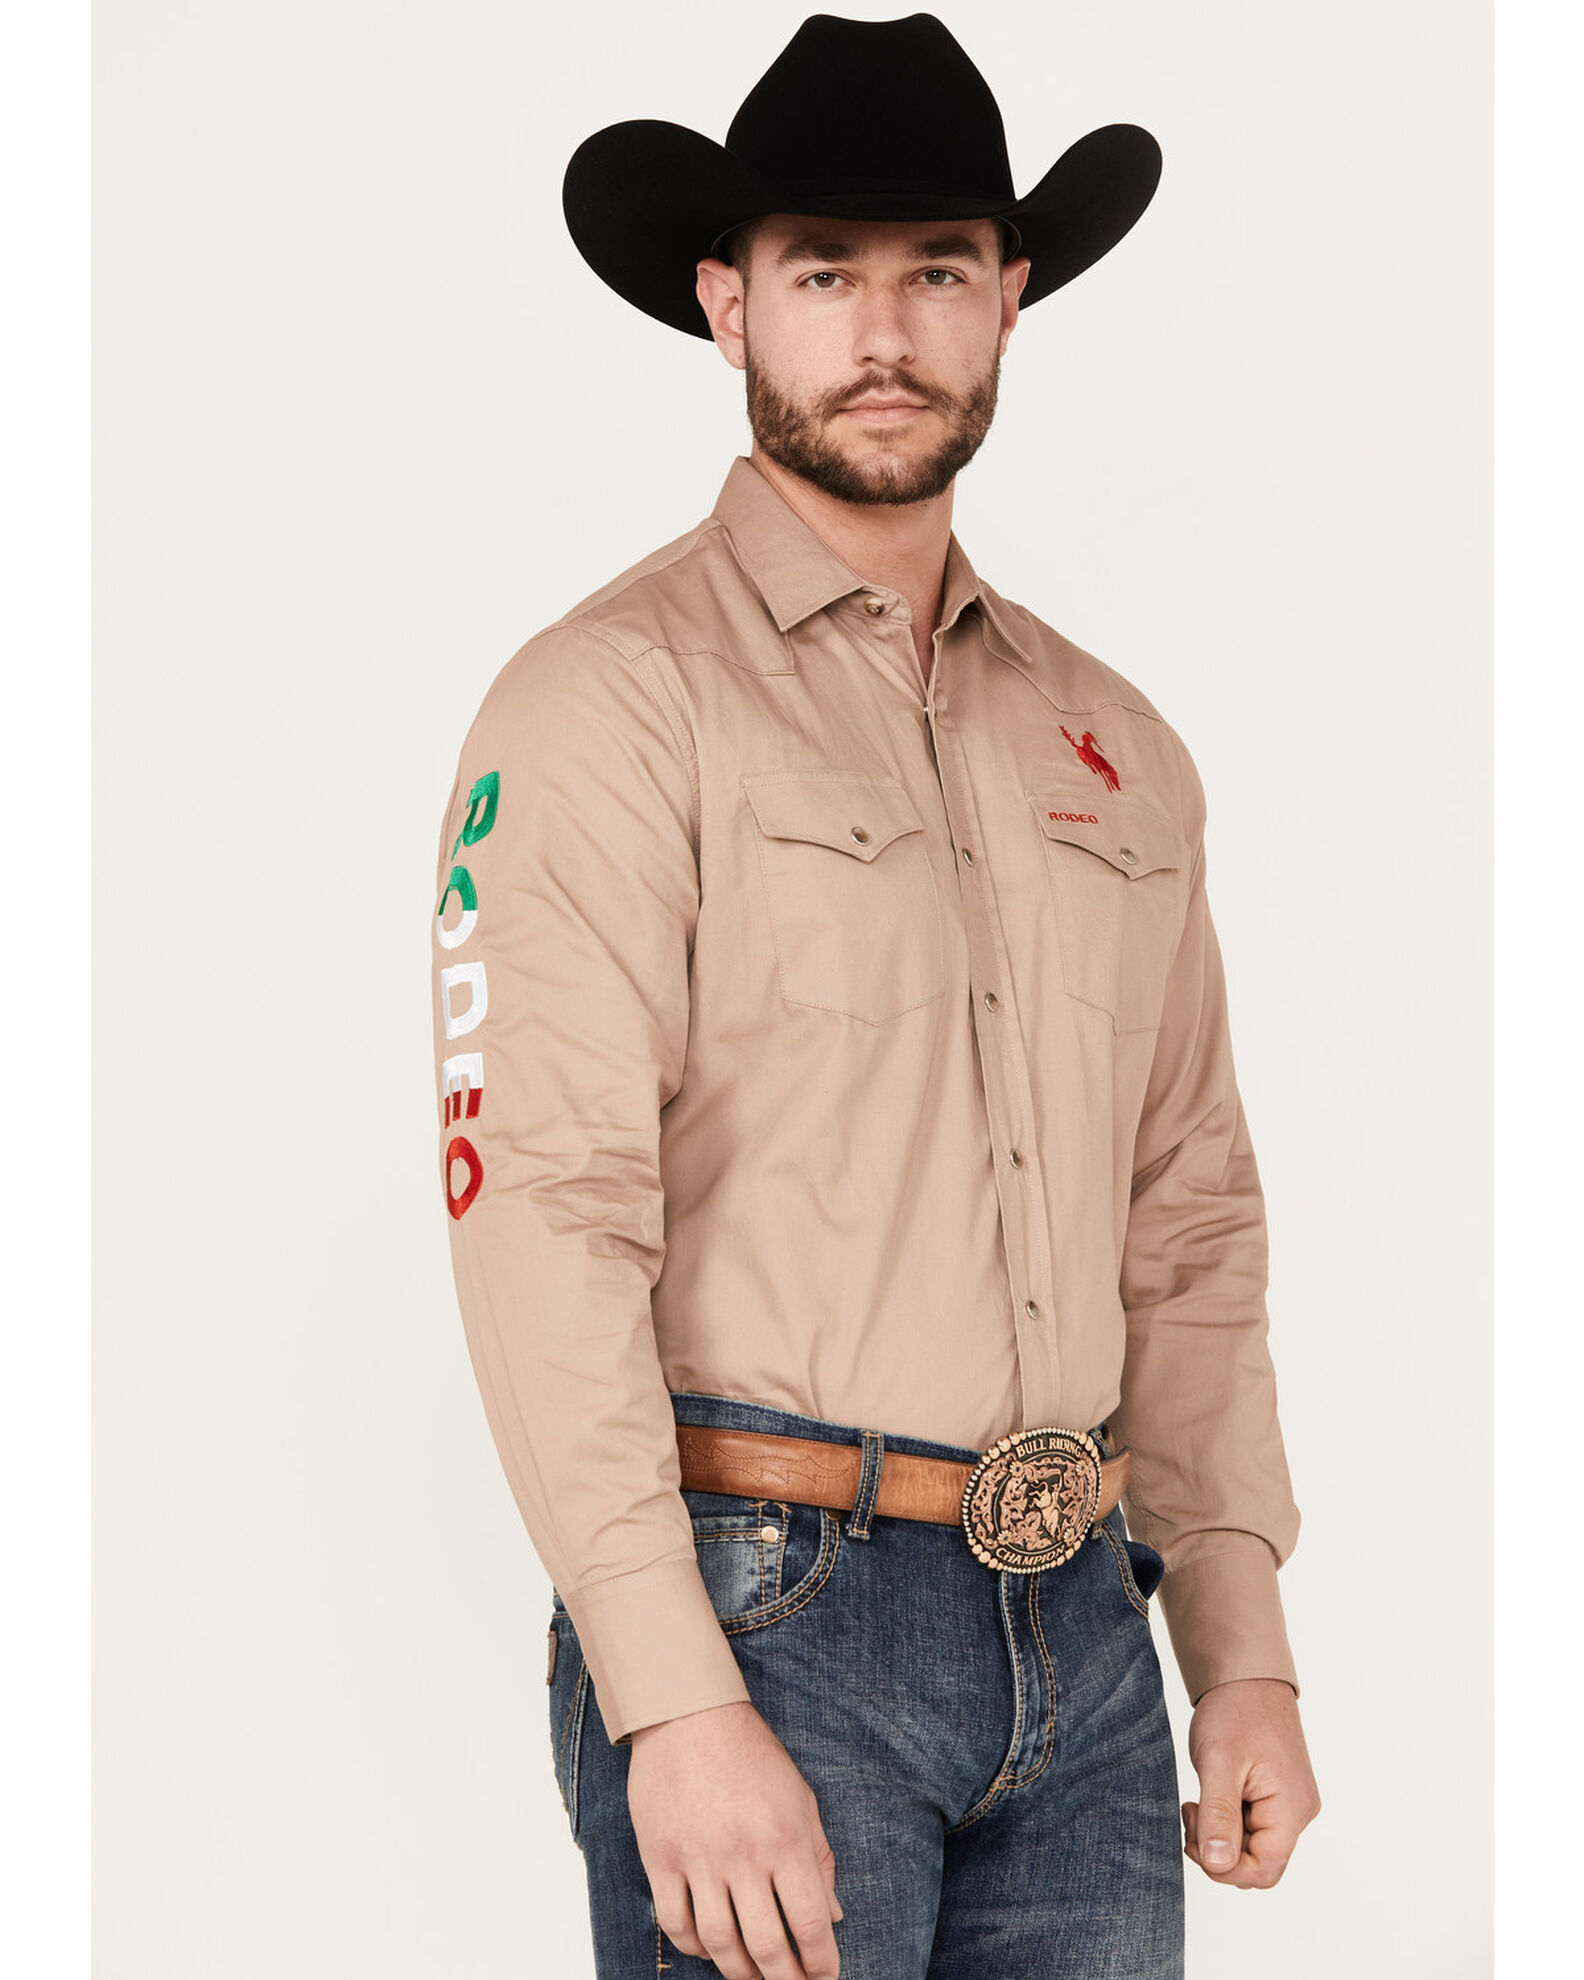 Rodeo Clothing Men's Mexico Flag Long Sleeve Snap Western Shirt